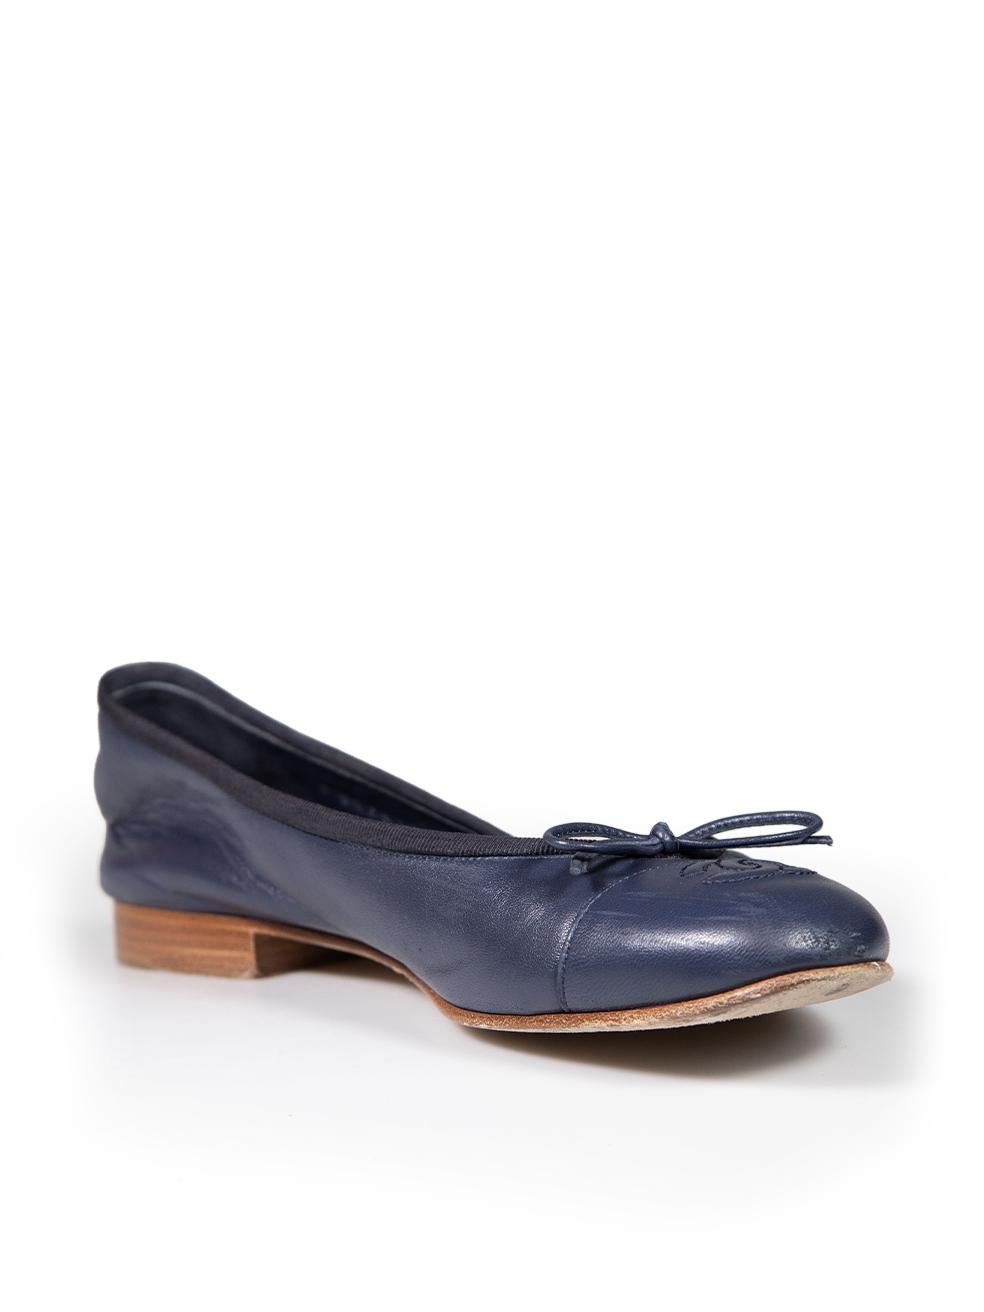 CONDITION is Good. Minor wear to flats is evident. Light scratches and abrasions to the tip and rear of both shoes on this used Chanel designer resale item.
 
 
 
 Details
 
 
 Navy
 
 Leather
 
 Flats
 
 Round toe
 
 Bow detail
 
 CC Logo